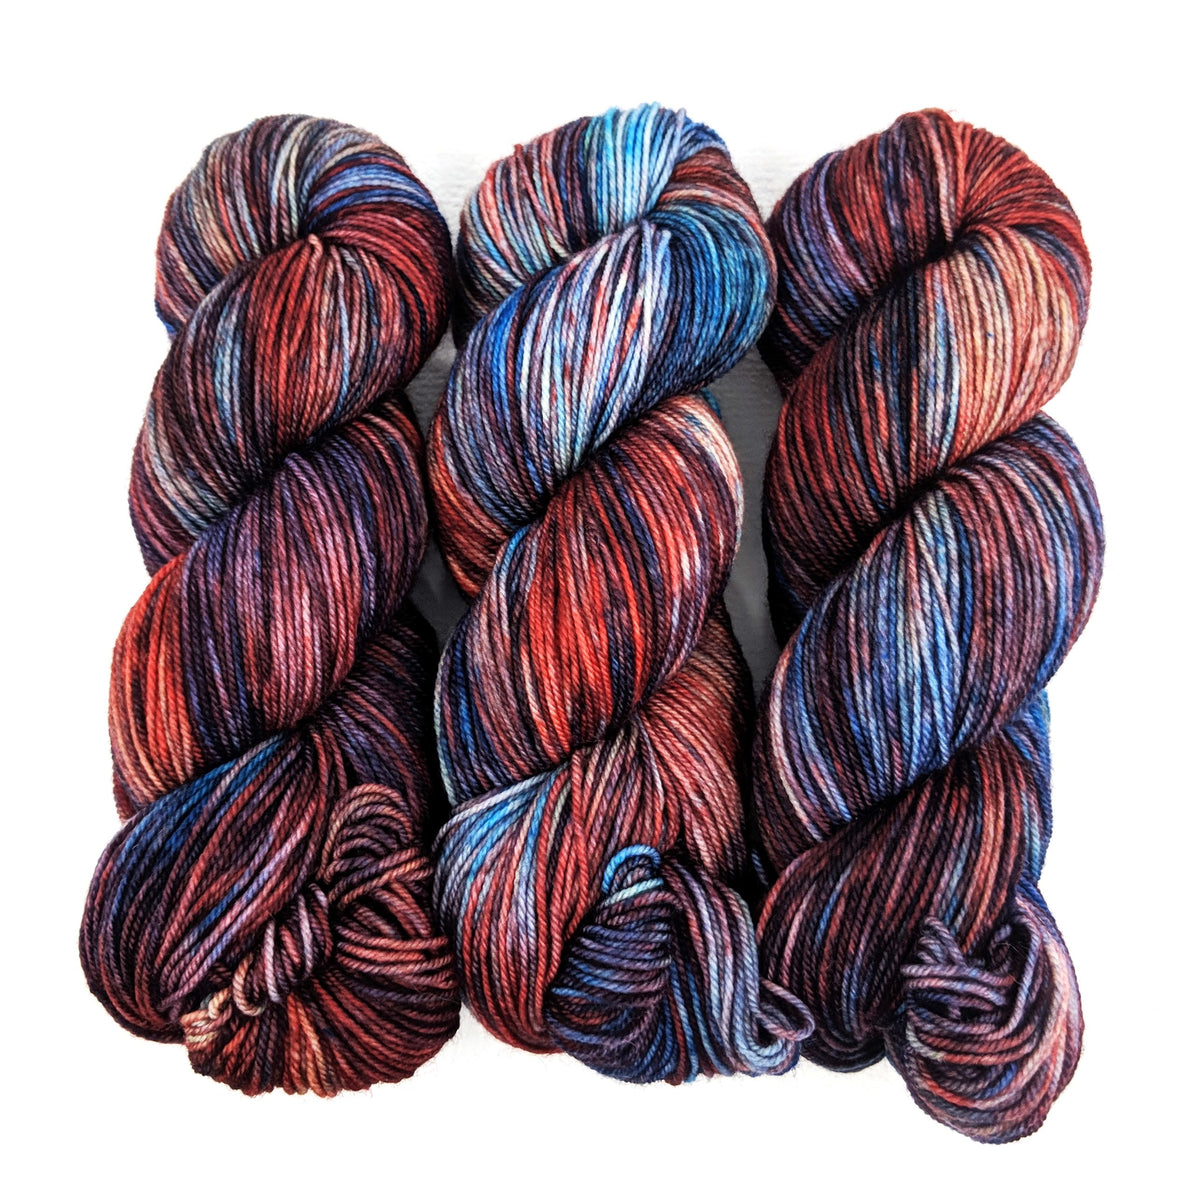 Plaid - Passion 8 Fingering - Dyed Stock